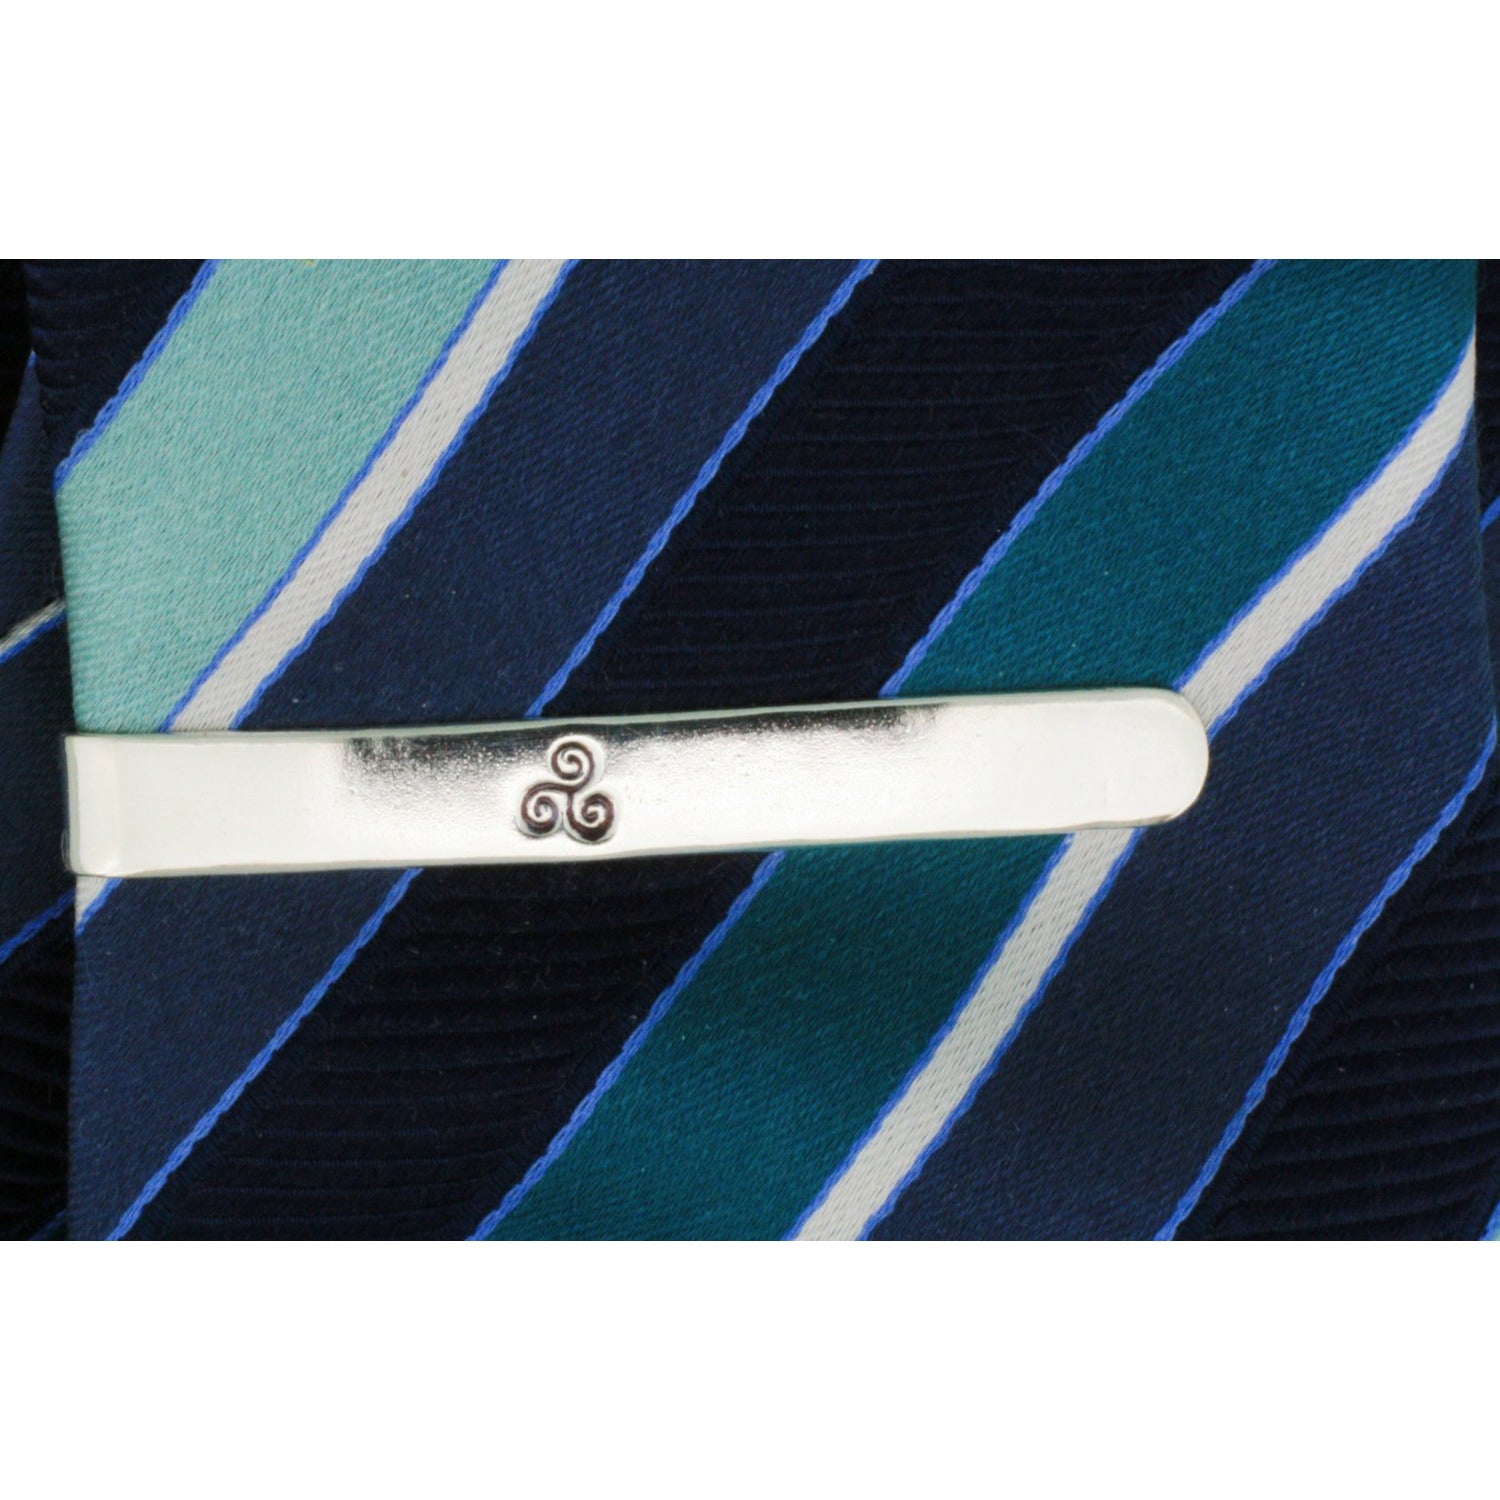 Sterling Silver (925) BDSM Triskele Tie Bar for Elegant and Discrete Style